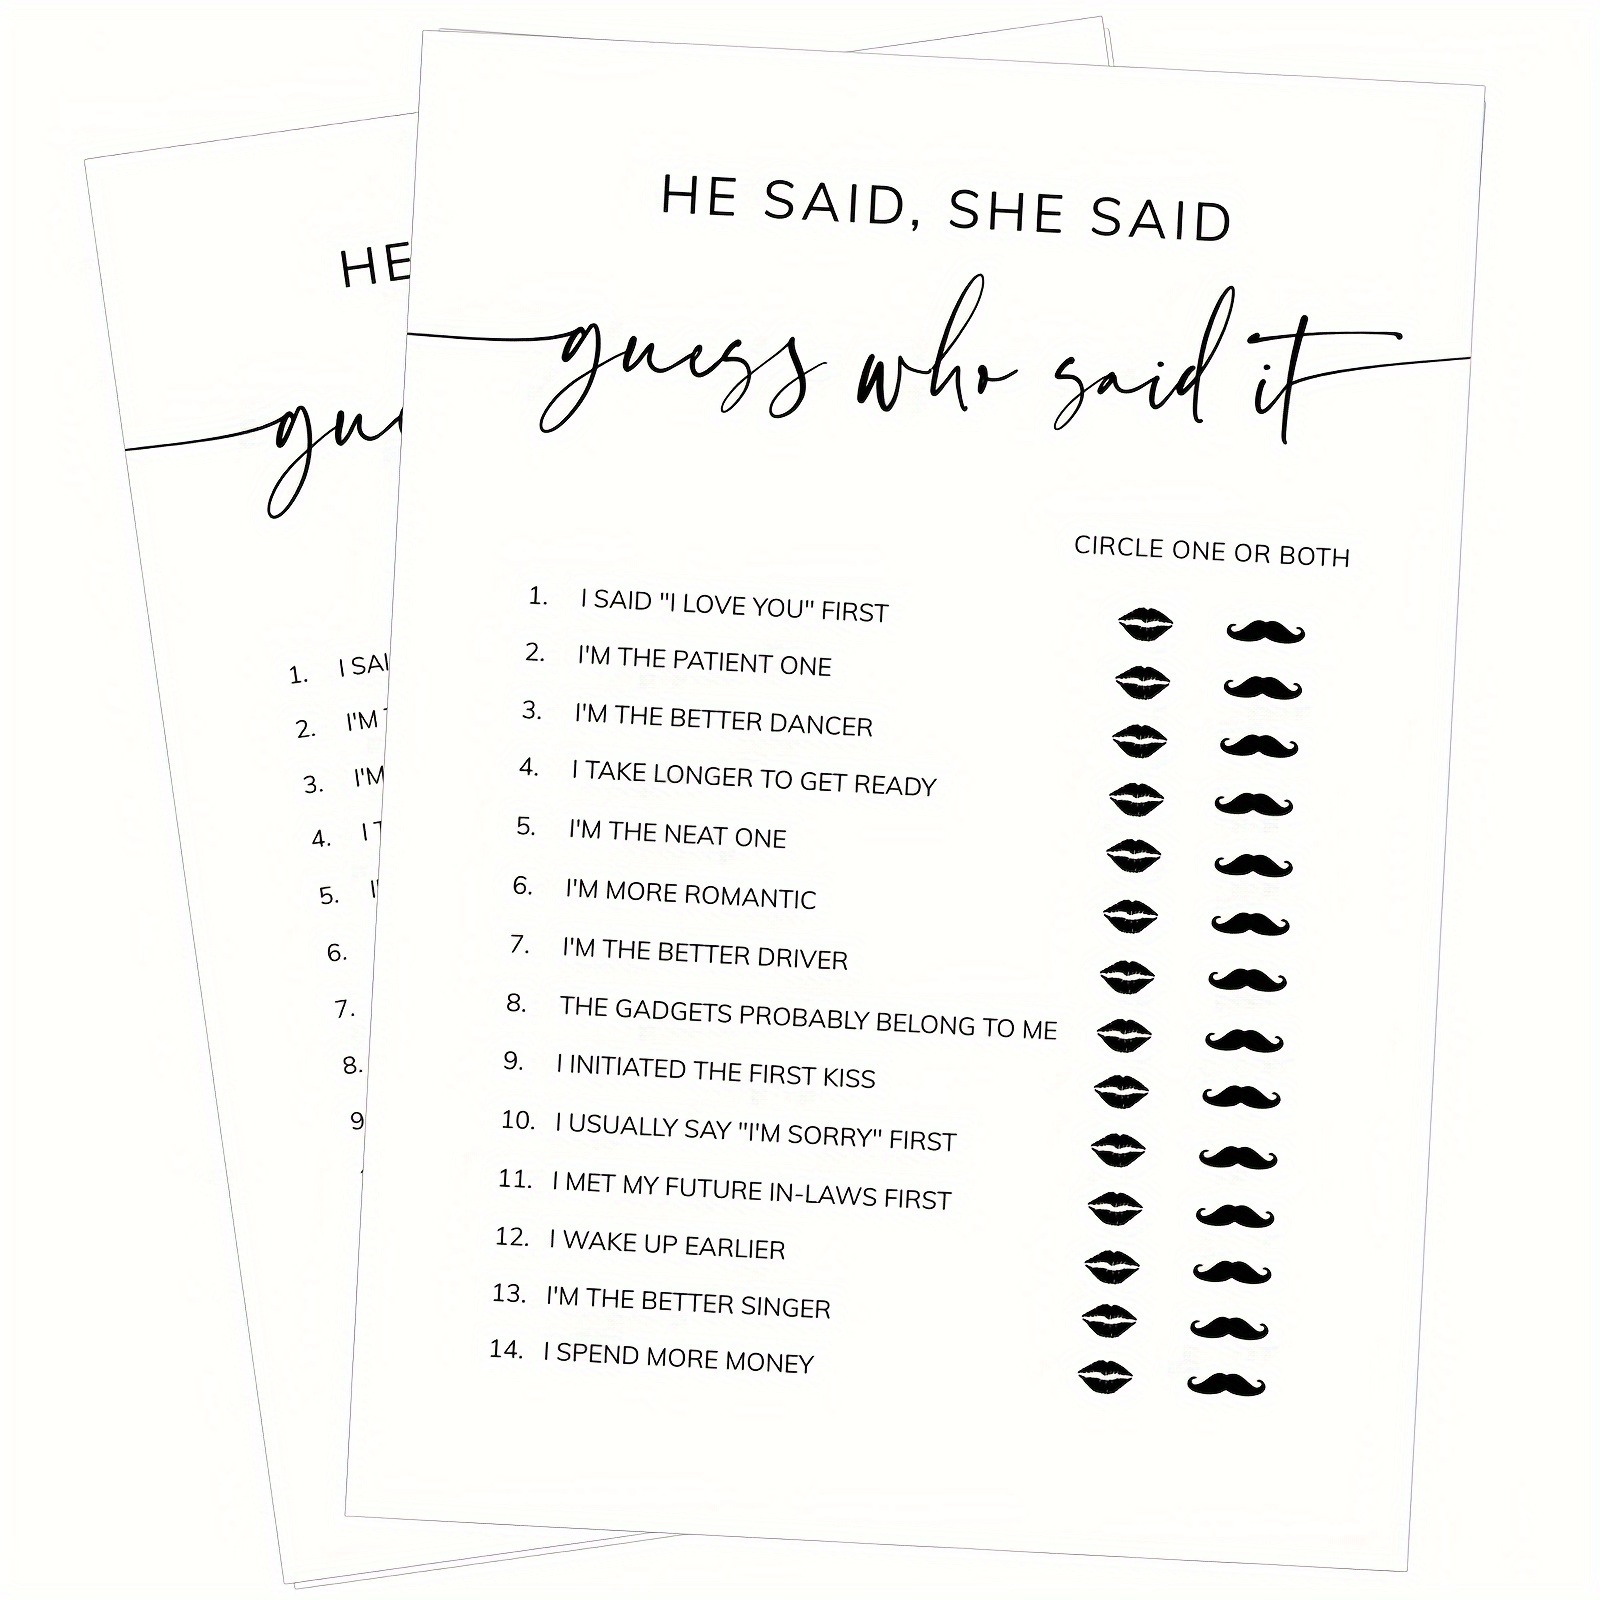 

20pcs Bridal Shower Game Cards - He Said She Said Game - Wedding Party Games Game Cards, Engagement Party Game, Modern Bridal Shower Party Favor & Decorations